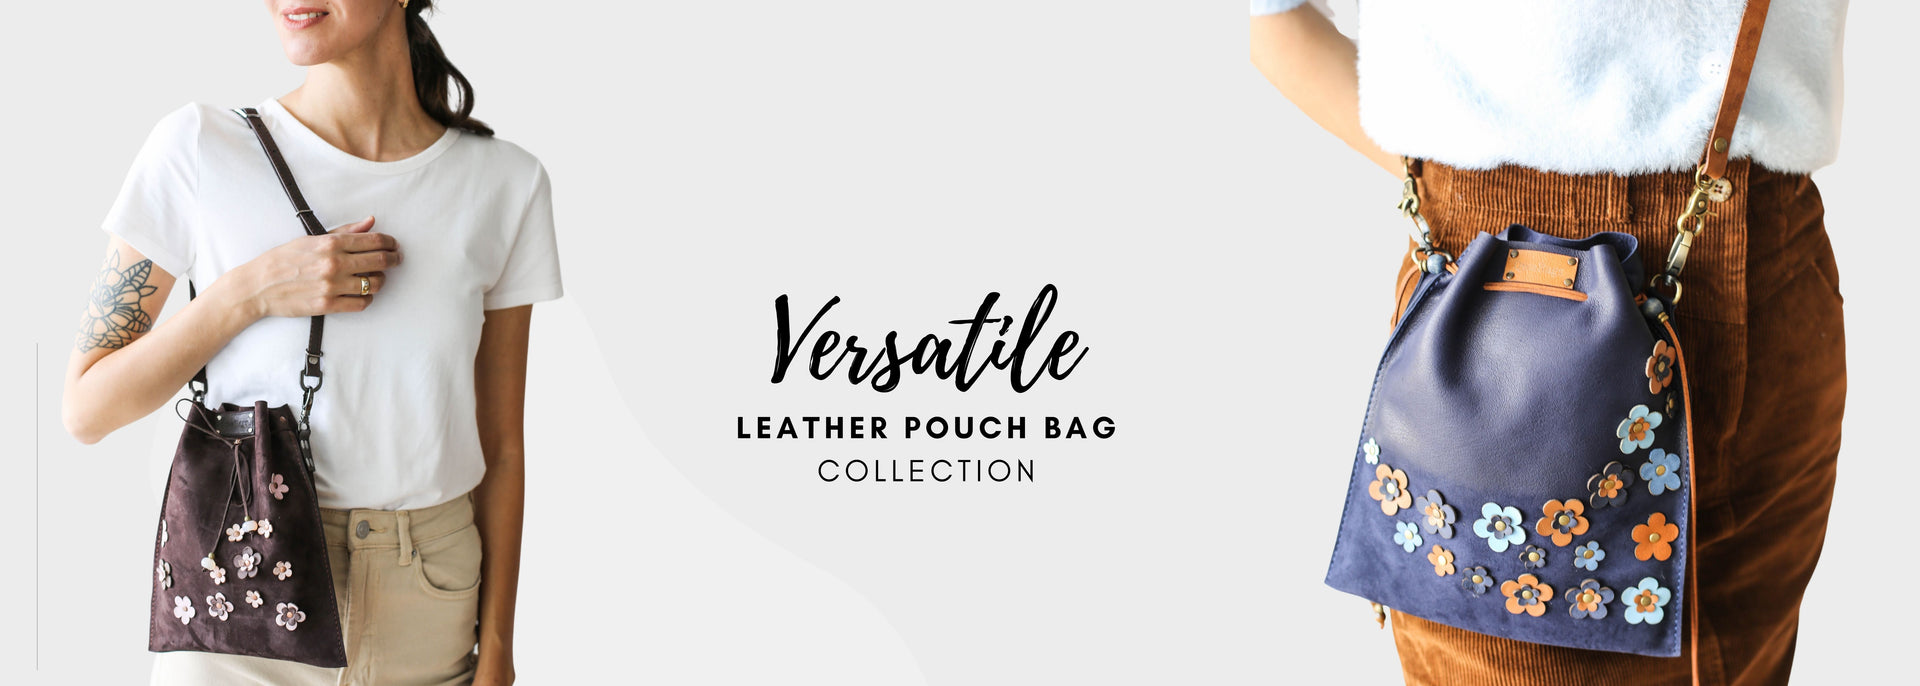 Leather Pouch Bags